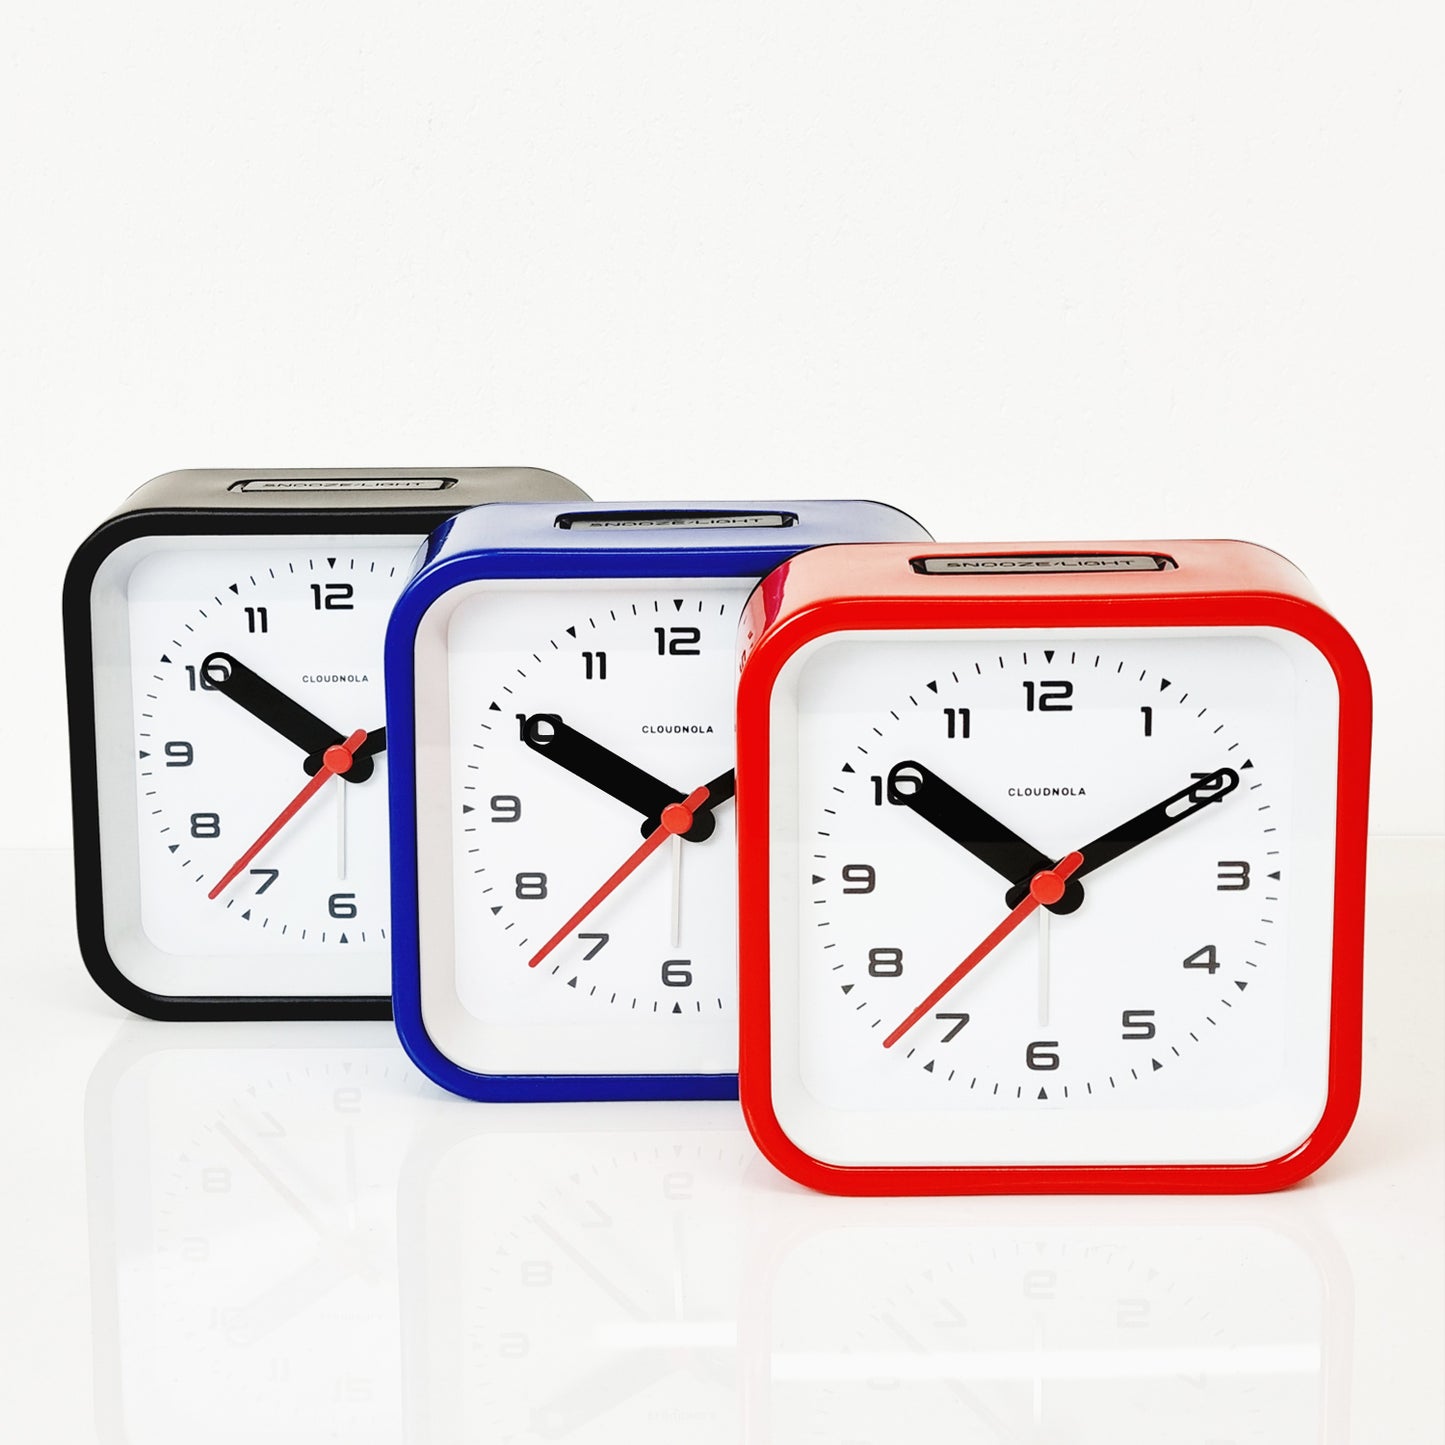 Railway Red Alarm Clock - Bold Square Silhouette - LED Display - Quiet Operation